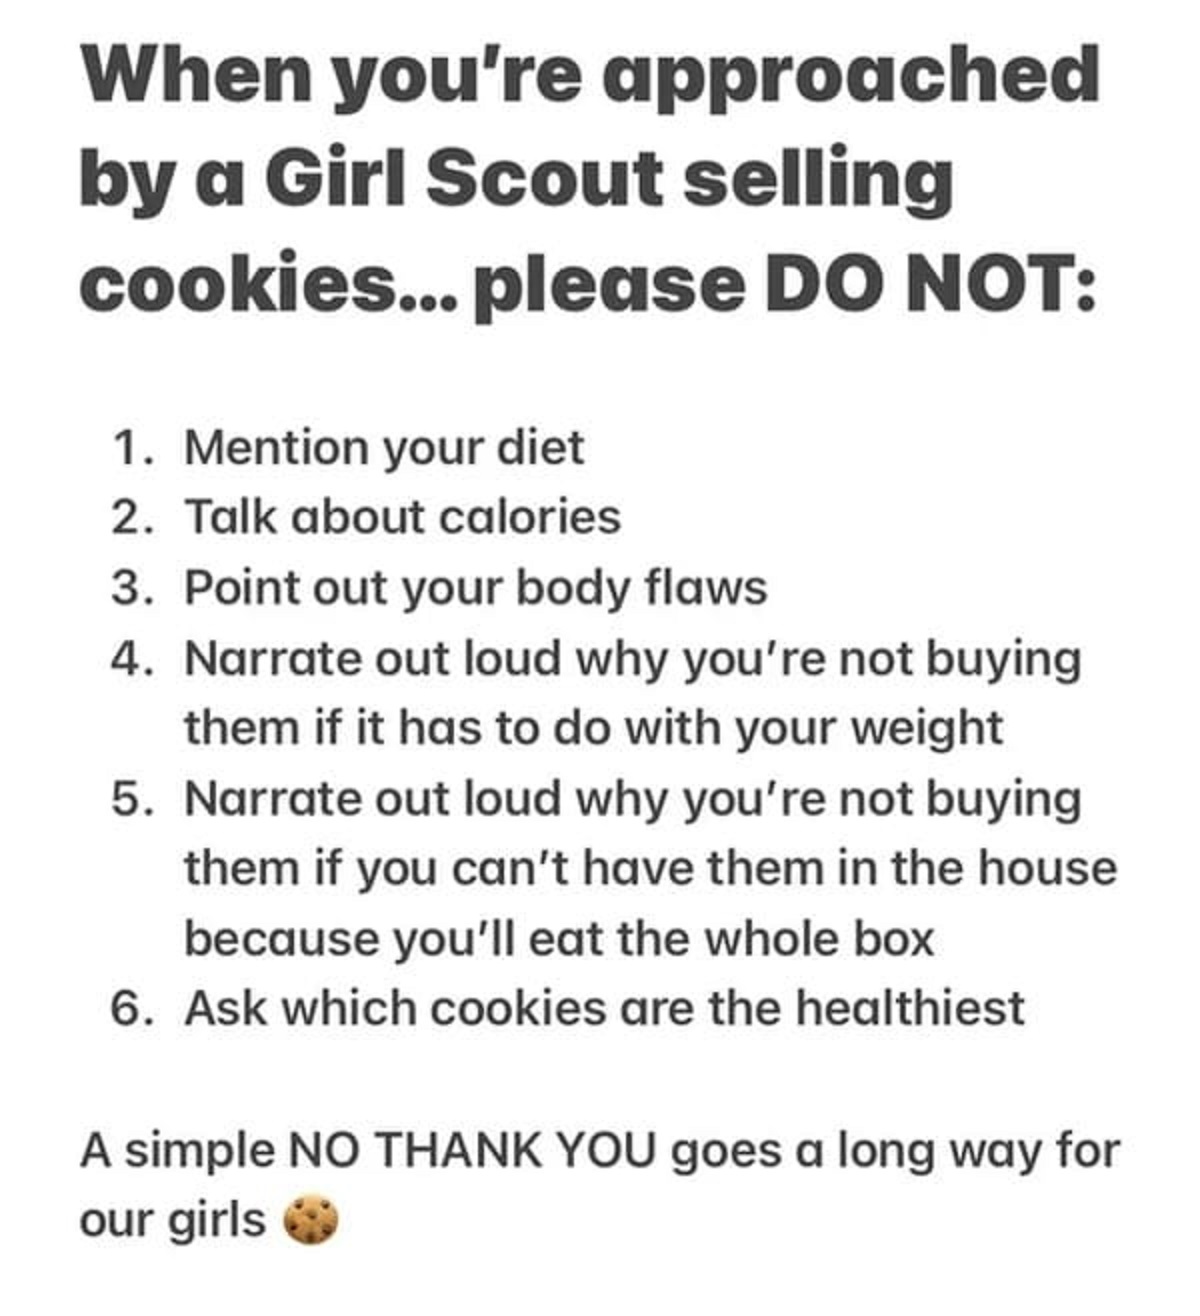 document - When you're approached by a Girl Scout selling cookies... please Do Not 1. Mention your diet 2. Talk about calories 3. Point out your body flaws 4. Narrate out loud why you're not buying them if it has to do with your weight 5. Narrate out loud